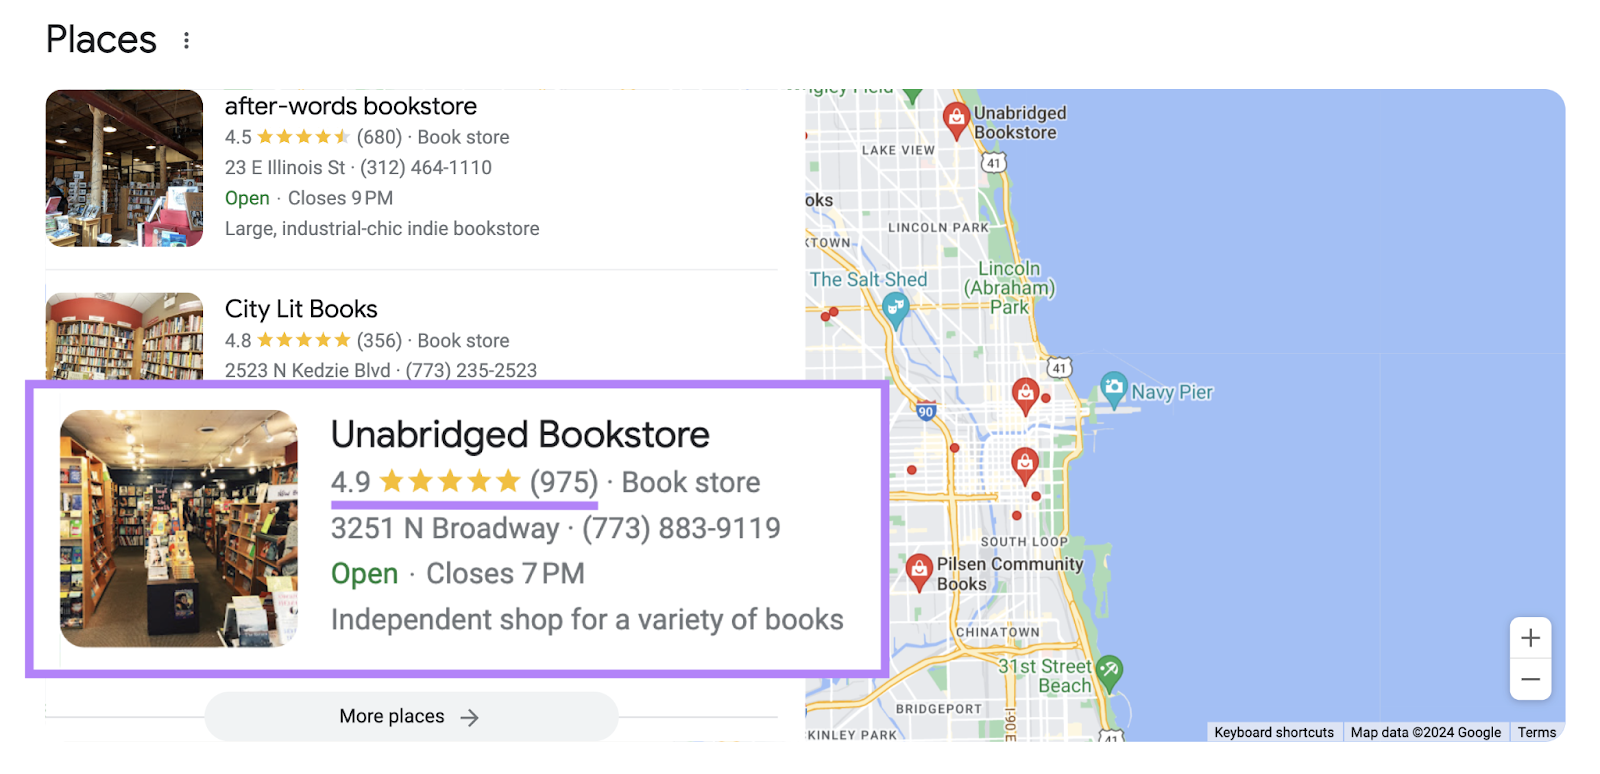 local map pack for chicago bookstores highlights one listing with 4.9 stars and almost 1,000 reviews